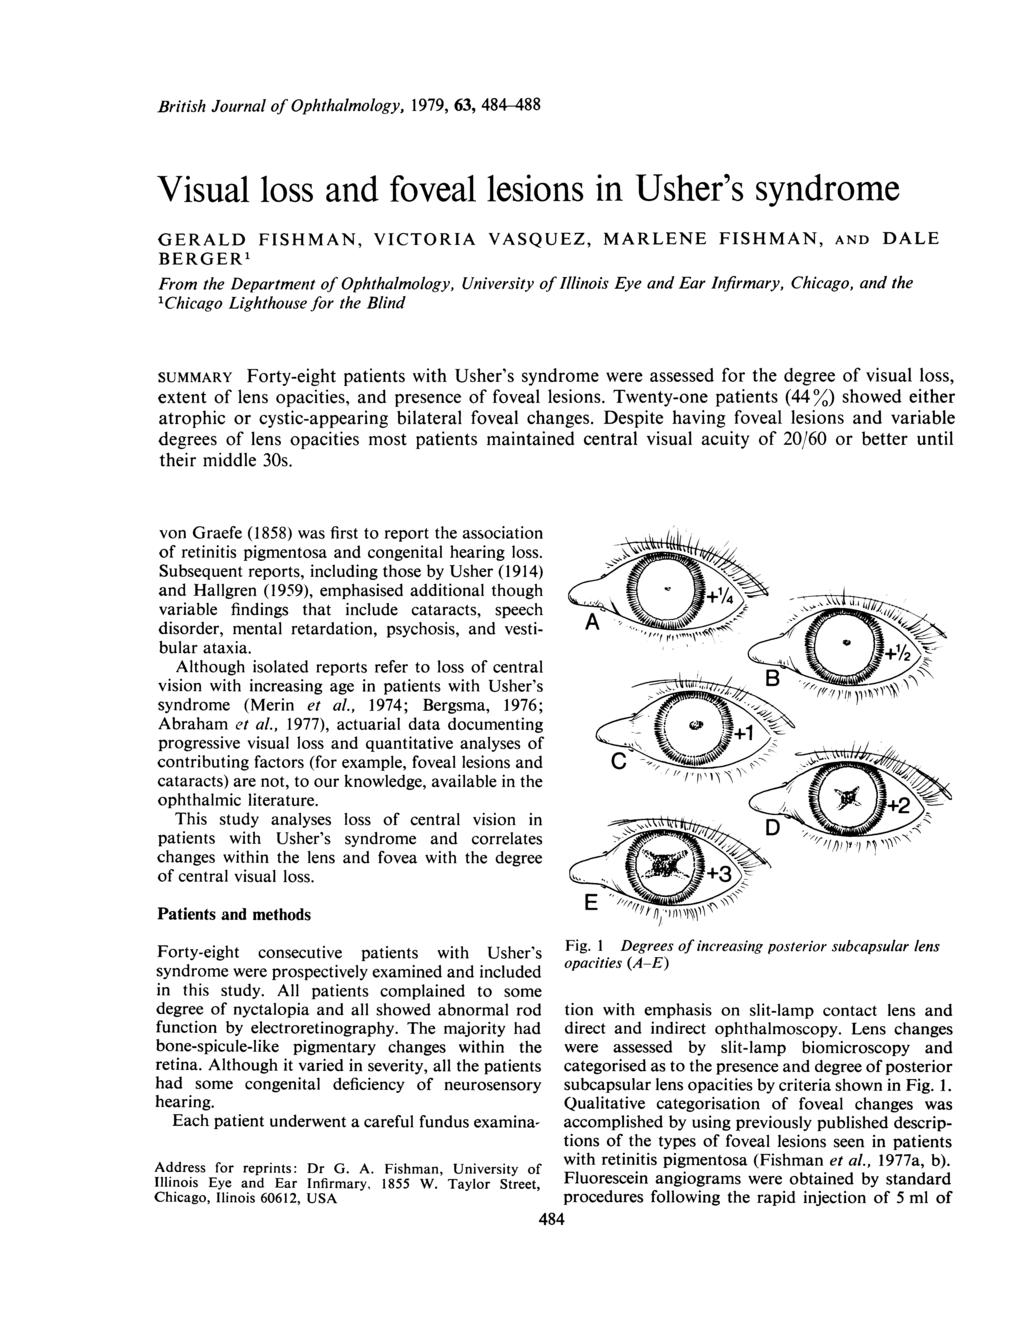 British Journal of Ophthalmology, 1979, 63, 484-488 Visual loss and foveal lesions in Usher's syndrome GERALD FISHMAN, VICTORIA VASQUEZ, MARLENE FISHMAN, AND BERGER' From the Department of